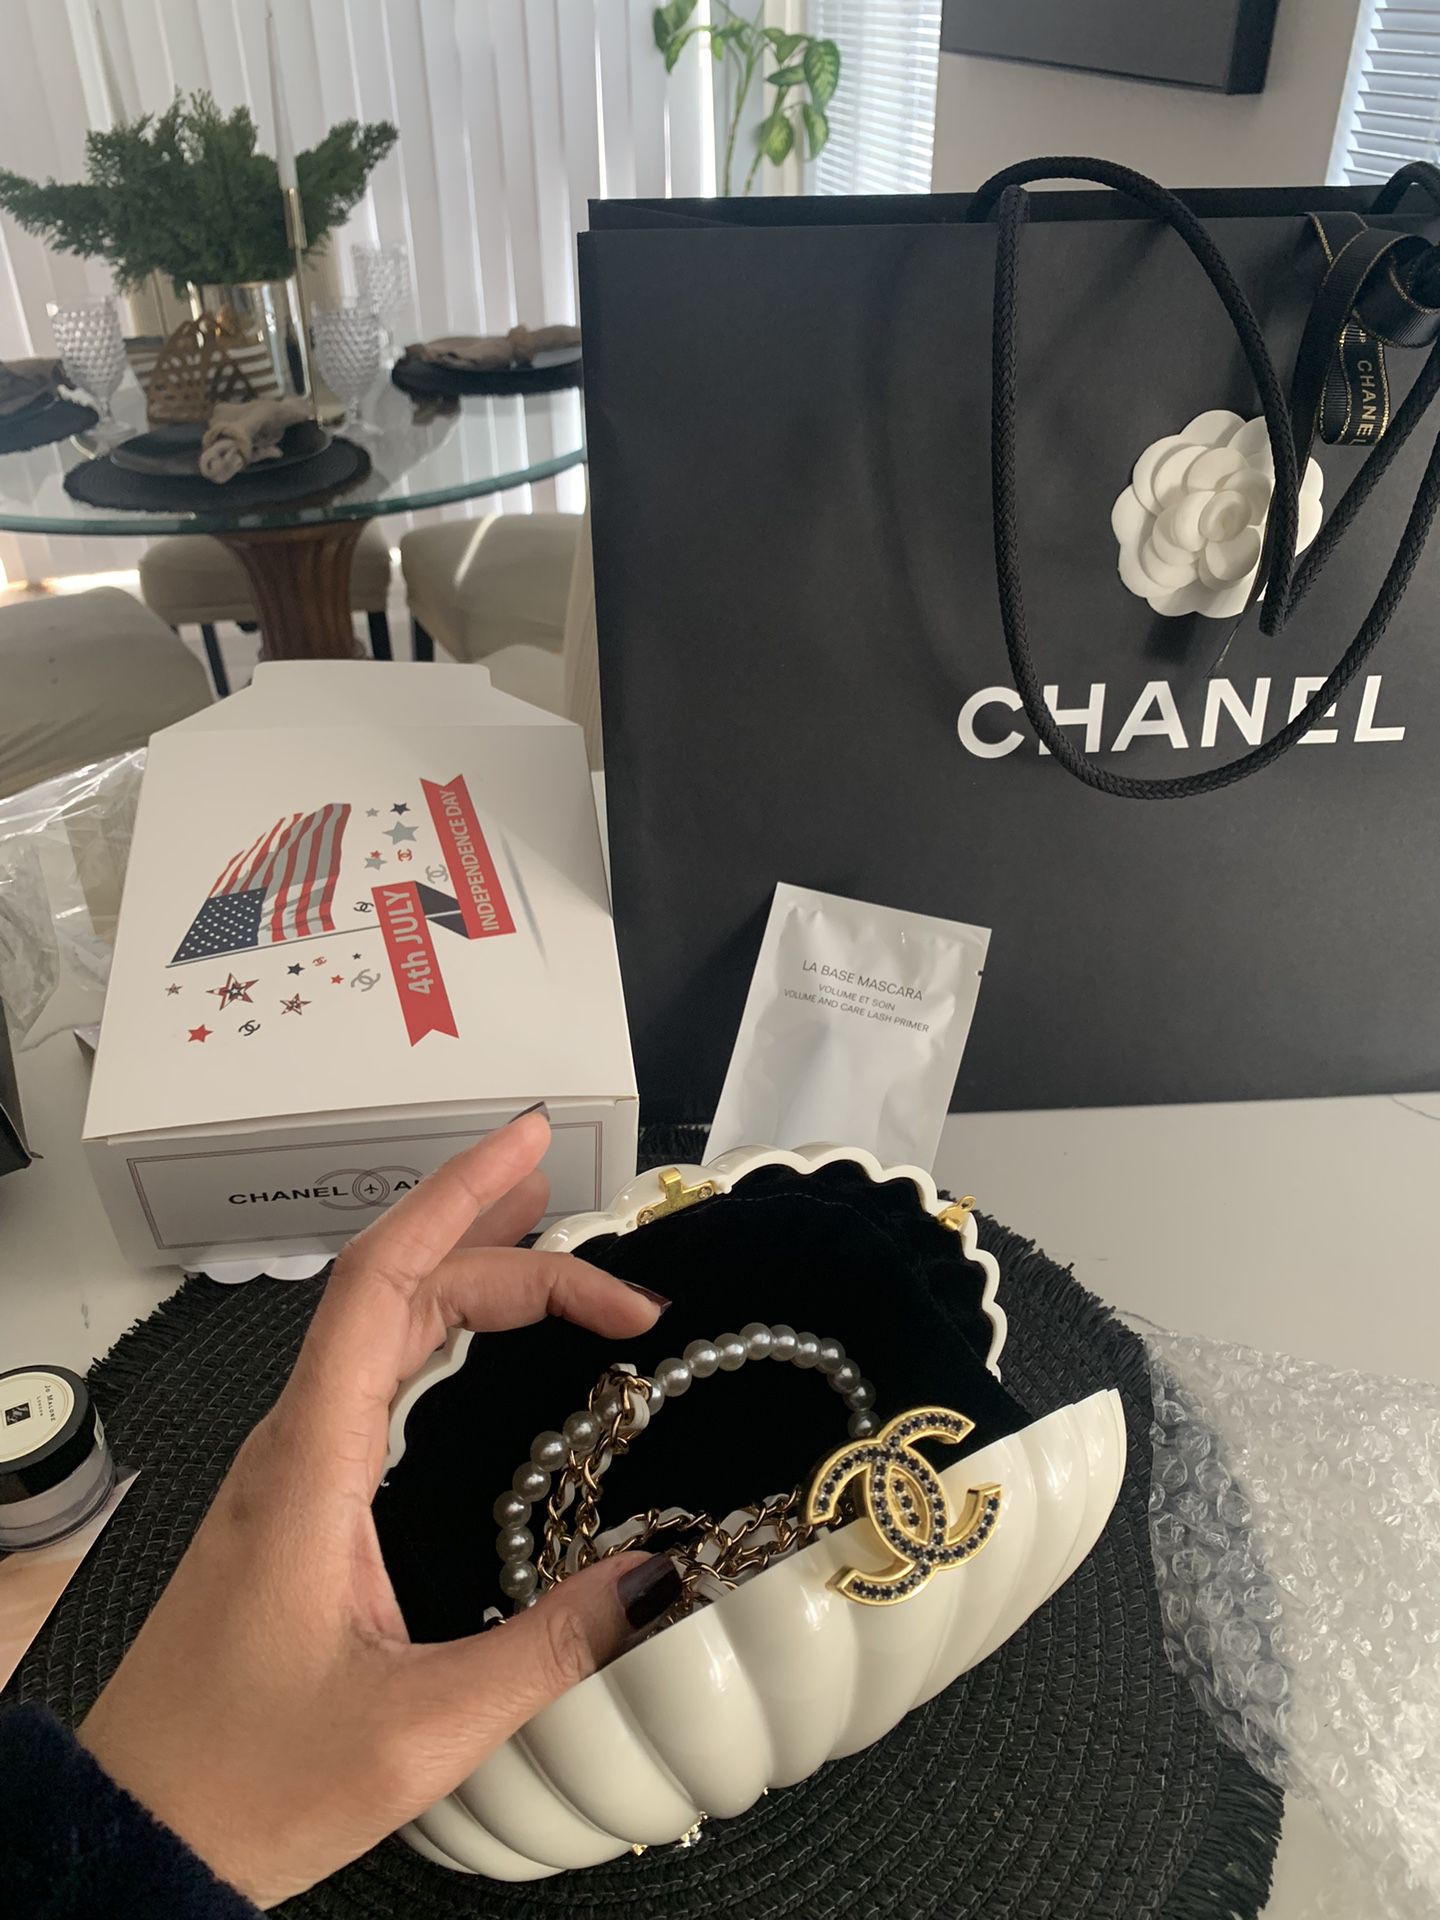 Chanel Shell Clam clutch/crossbody bag for Sale in Costa Mesa, CA